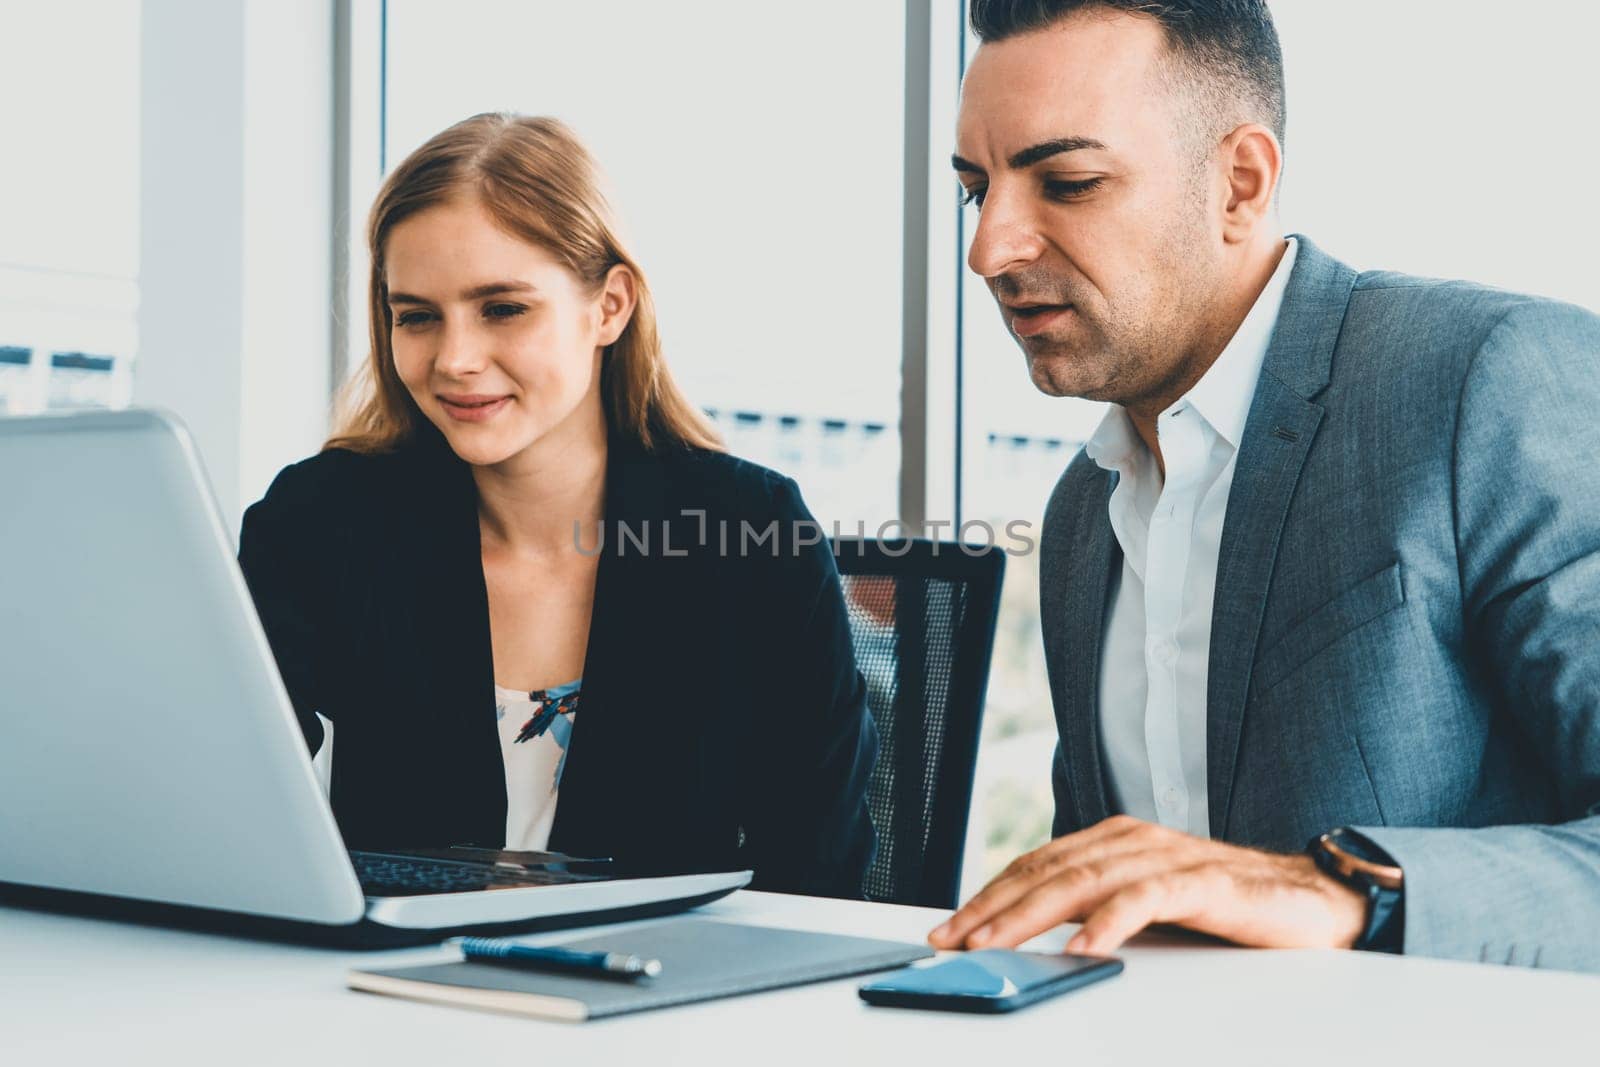 Businessman executive is in meeting discussion with a businesswoman worker in modern workplace office. People corporate business team concept. uds